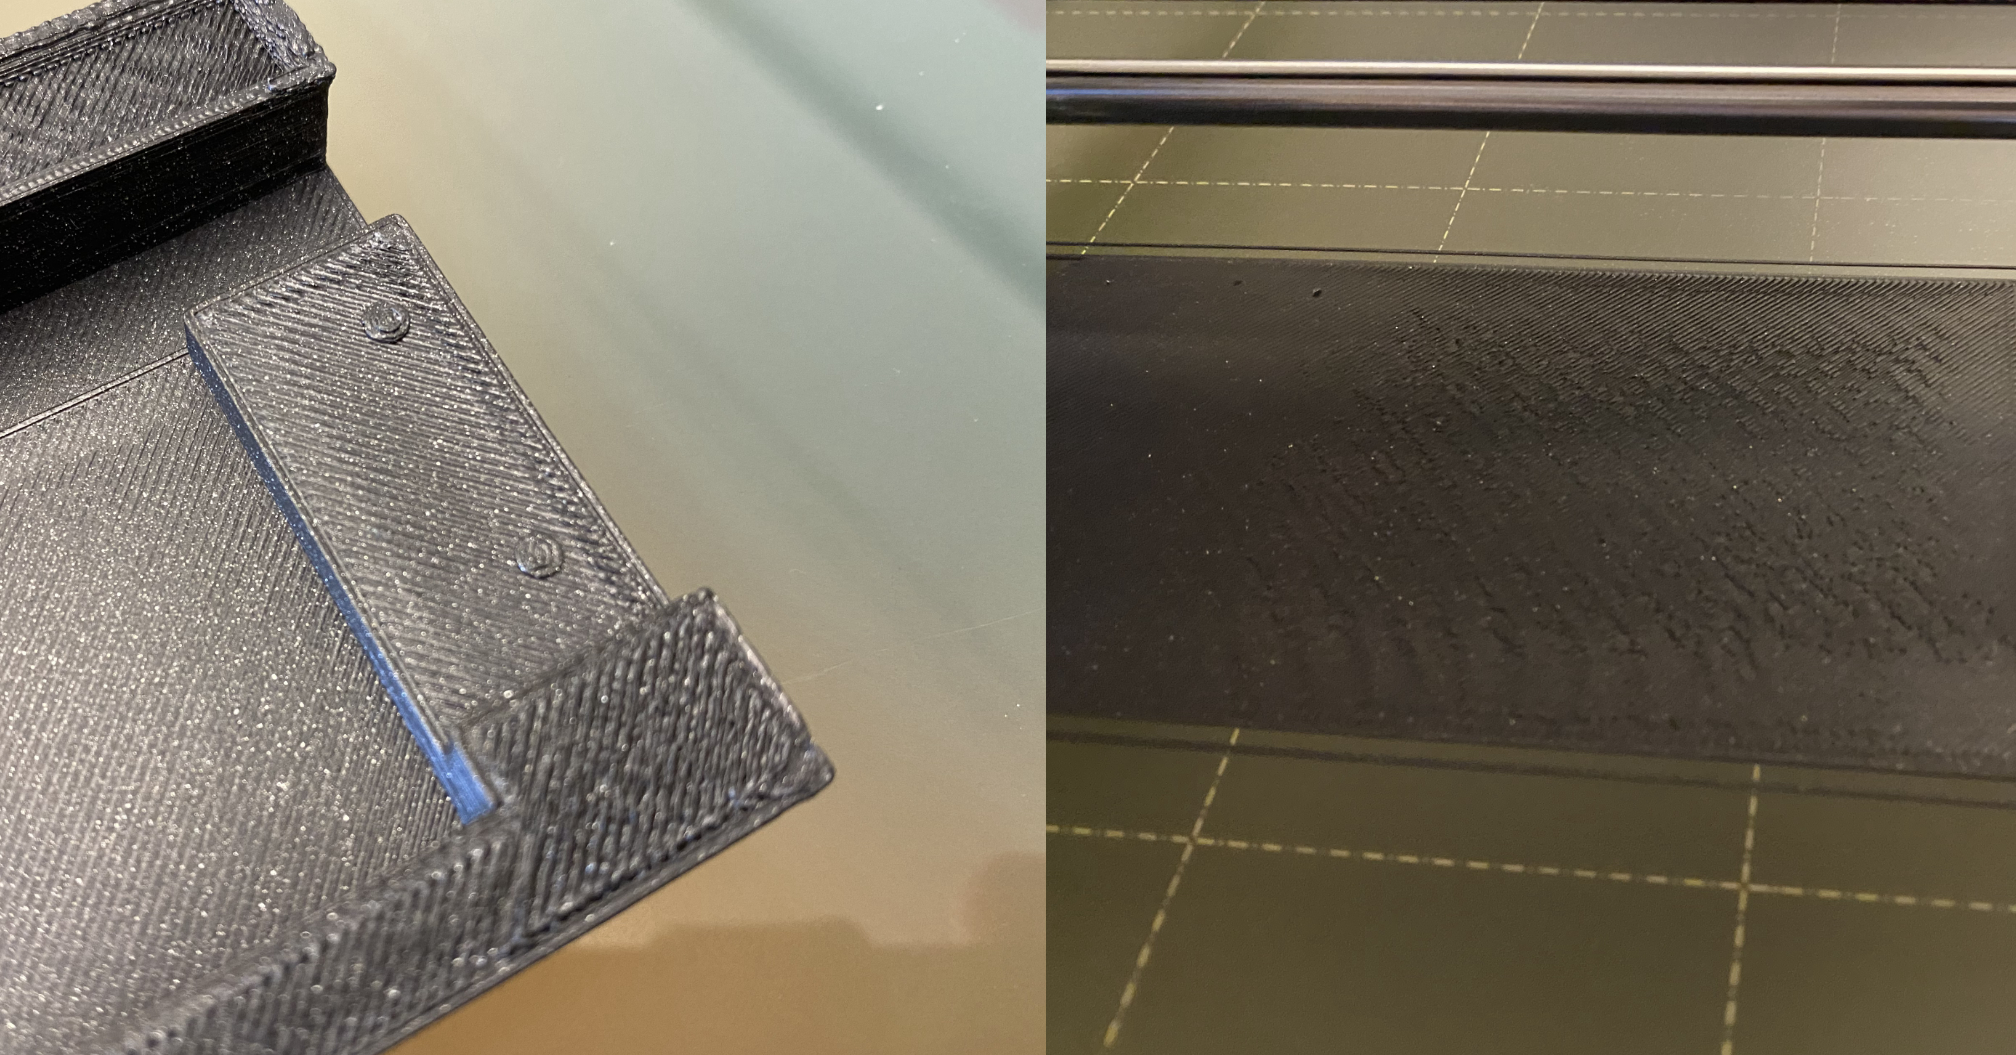 First layer wavy and lifting up : r/prusa3d